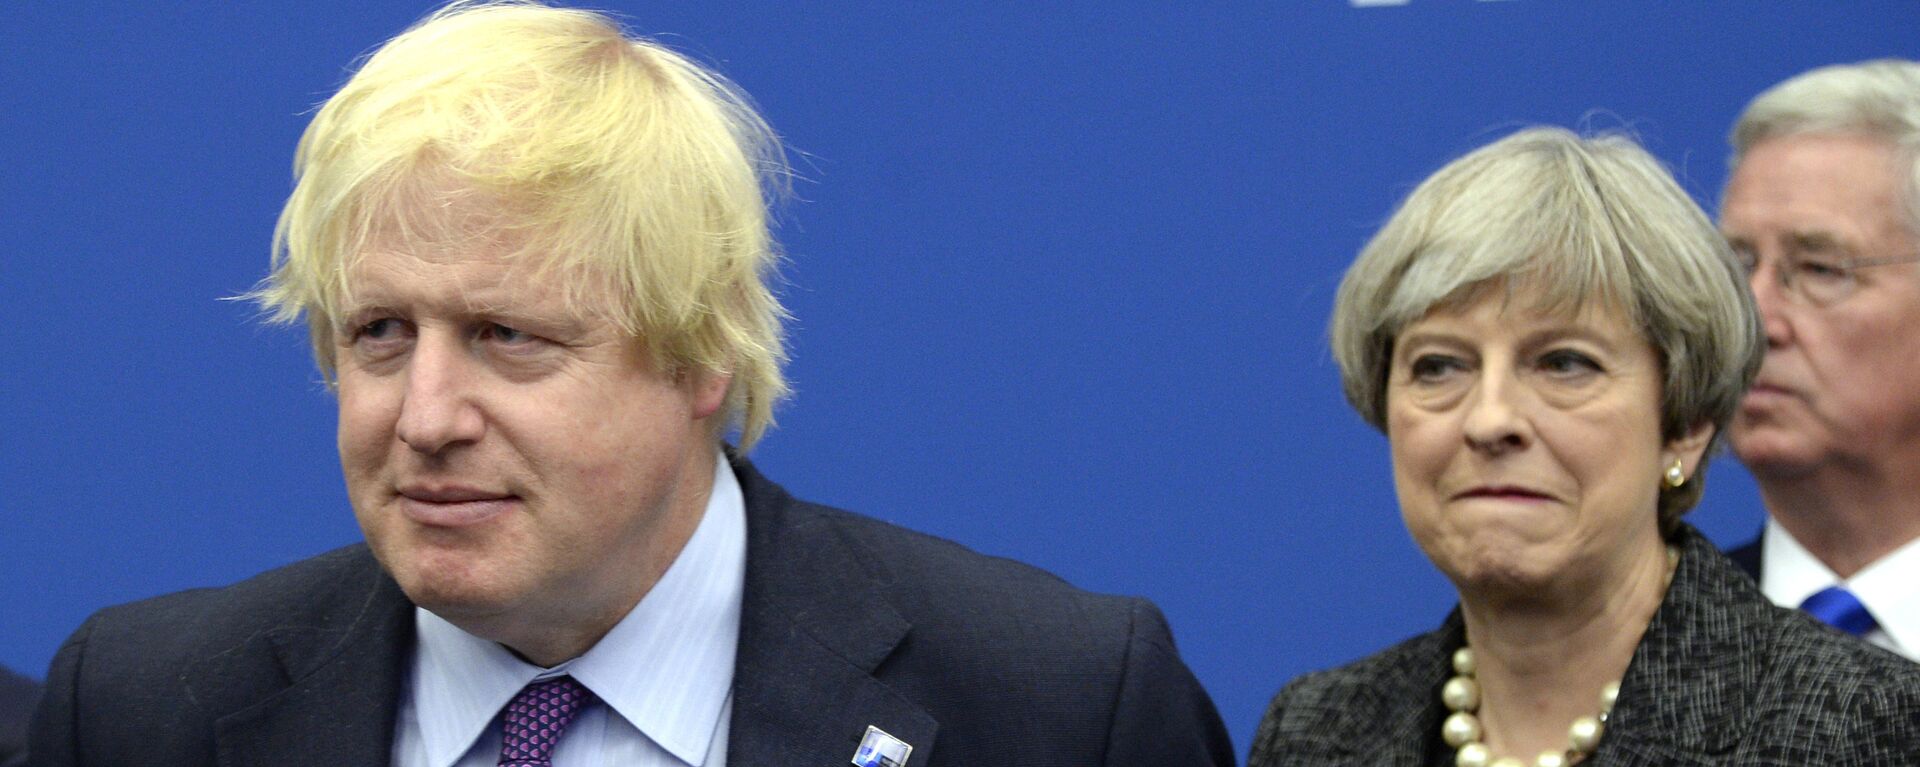 In this Thursday, May 25, 2017 file photo British Foreign Secretary Boris Johnson, left, and Britain's Prime Minister Theresa May arrive for a meeting during the NATO summit of heads of state and government, at the NATO headquarters, in Brussels. British ex-Foreign Secretary Boris Johnson has slammed Prime Minister Theresa May's Brexit policy, a move likely to fuel speculation that he is seeking to oust her. Johnson wrote in the Daily Telegraph on Monday Sept. 3, 2018 that May's so-called Chequers plan for continued ties with the European Union after Brexit will leave Britain in a weakened position - Sputnik International, 1920, 15.12.2021